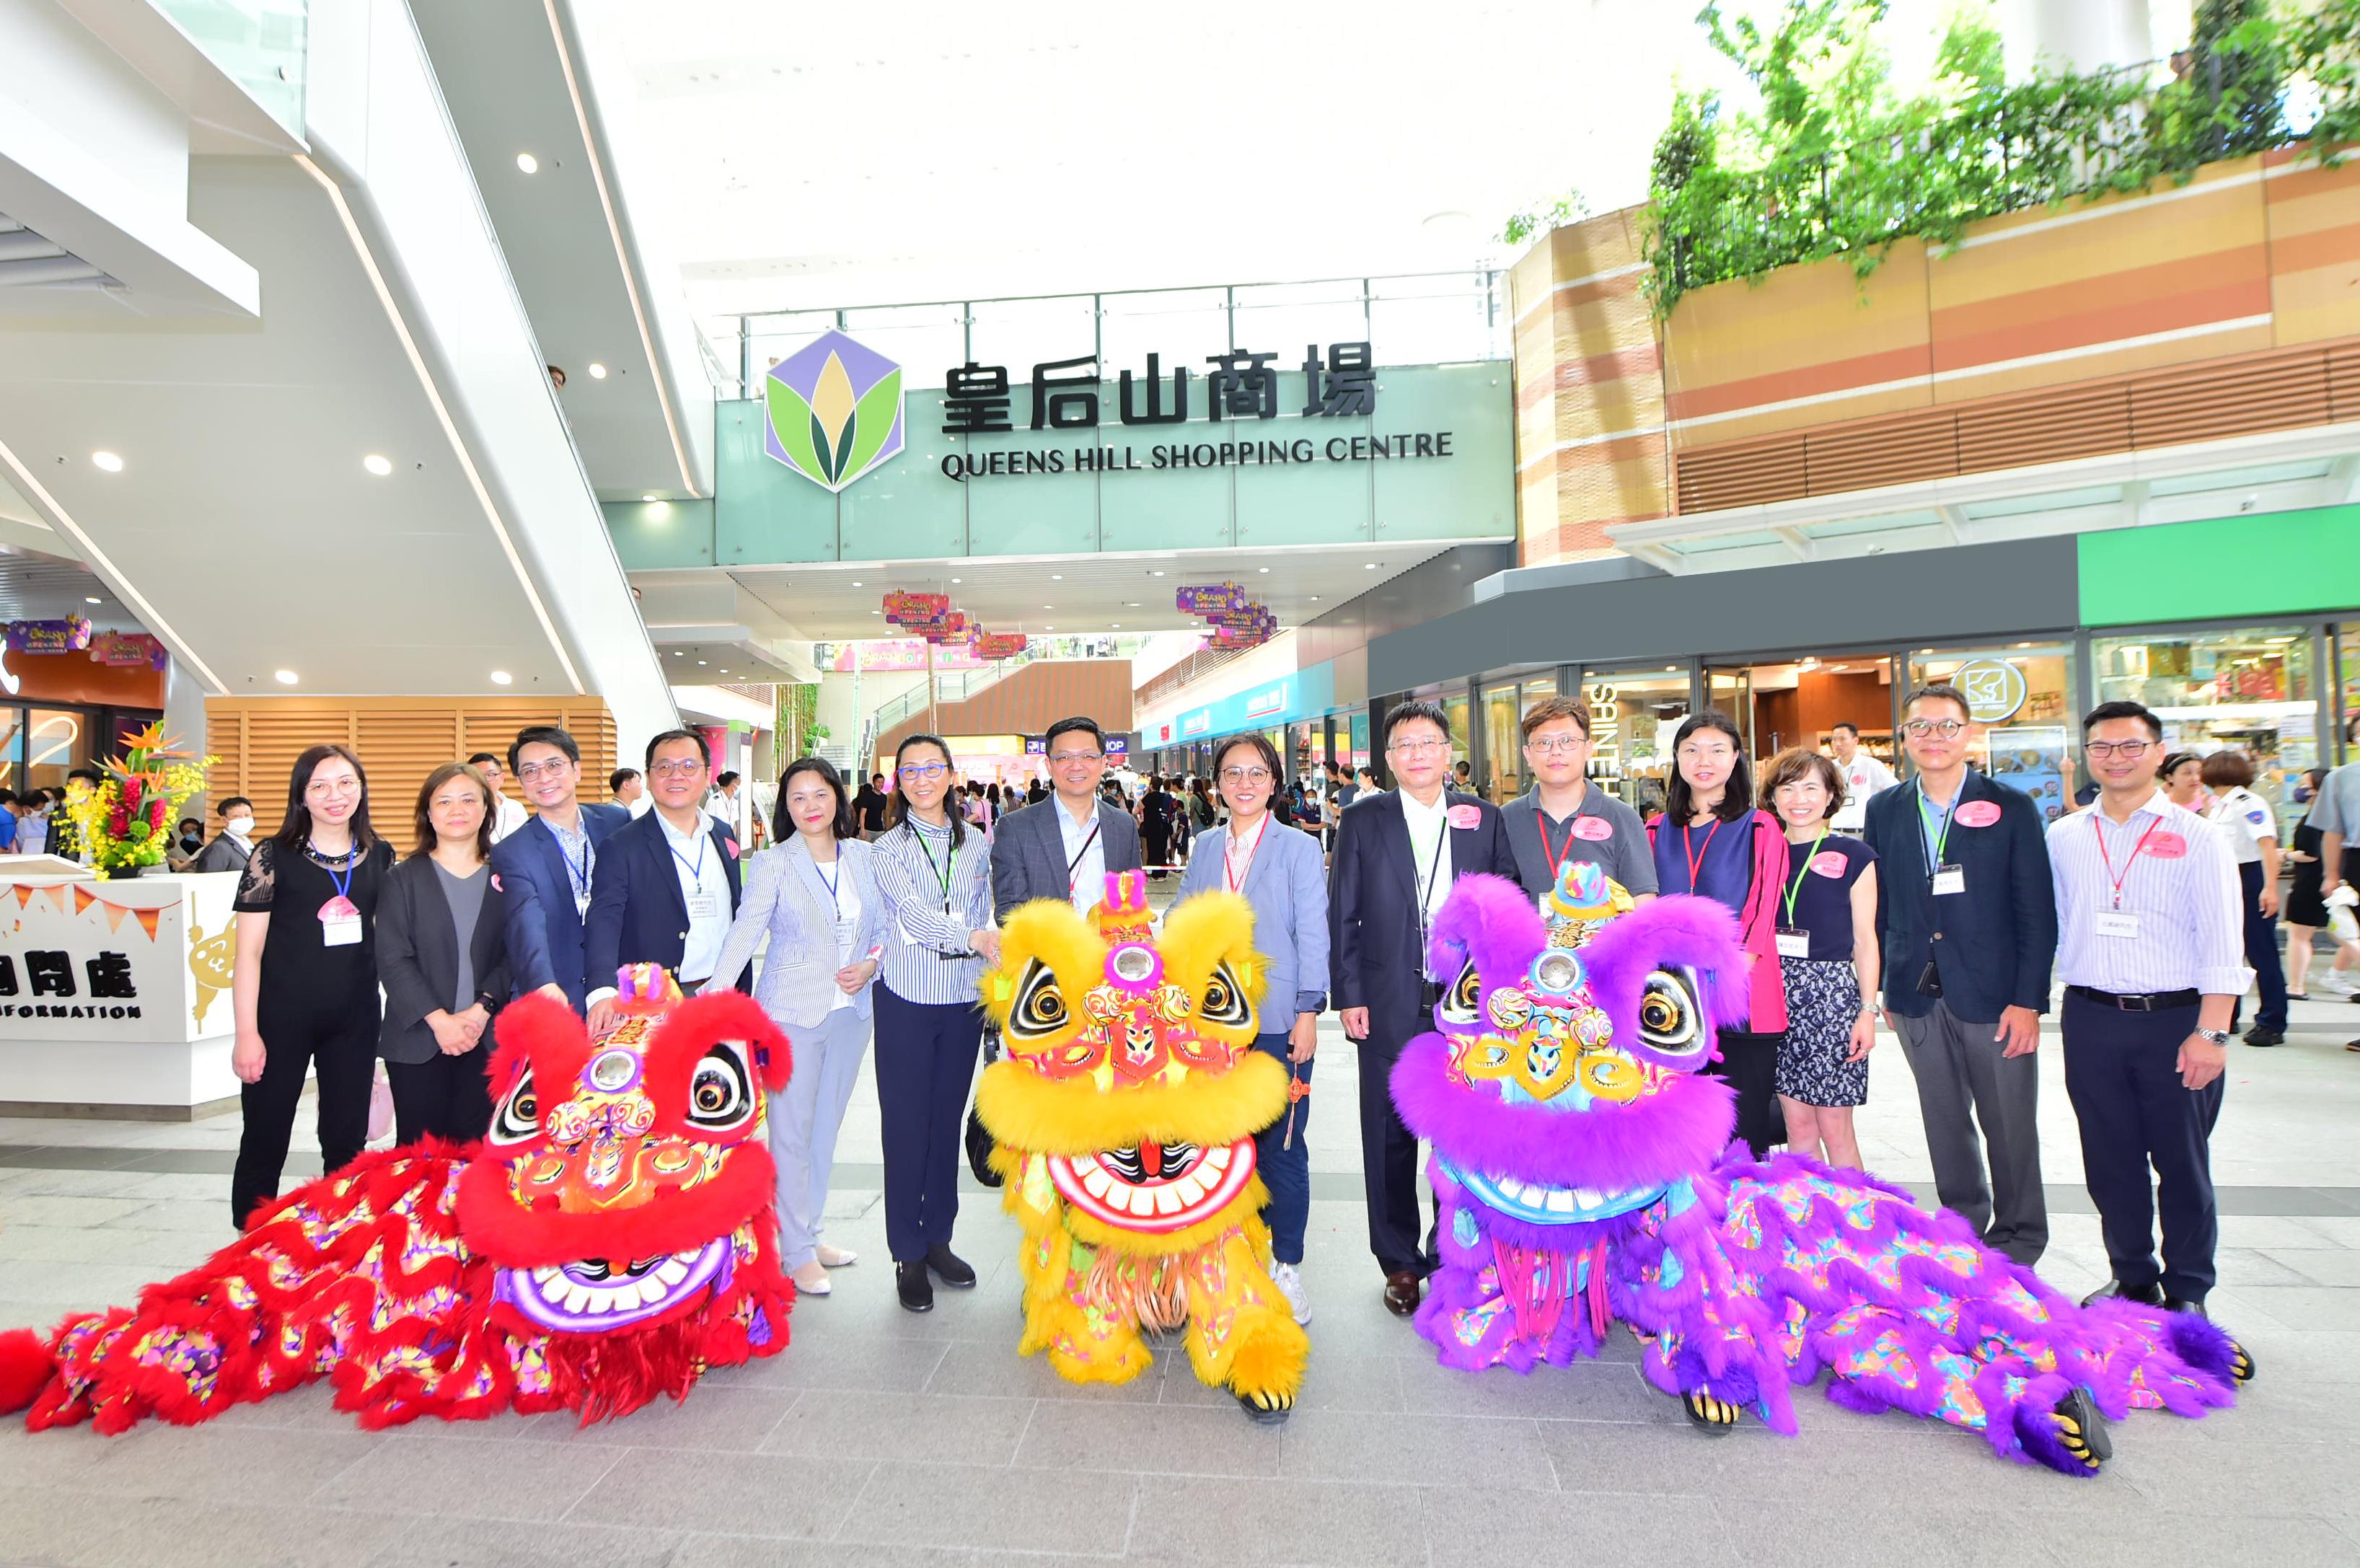 Members of the Hong Kong Housing Authority (HA) and its Commercial Properties Committee (CPC) today (June 20) officiated at the opening ceremony of the HA's Queens Hill Shopping Centre in Fanling. Photo shows the Chairman of the CPC, Ms Serena Lau (seventh right), members of the HA/CPC and officials of the Housing Department with the lions.